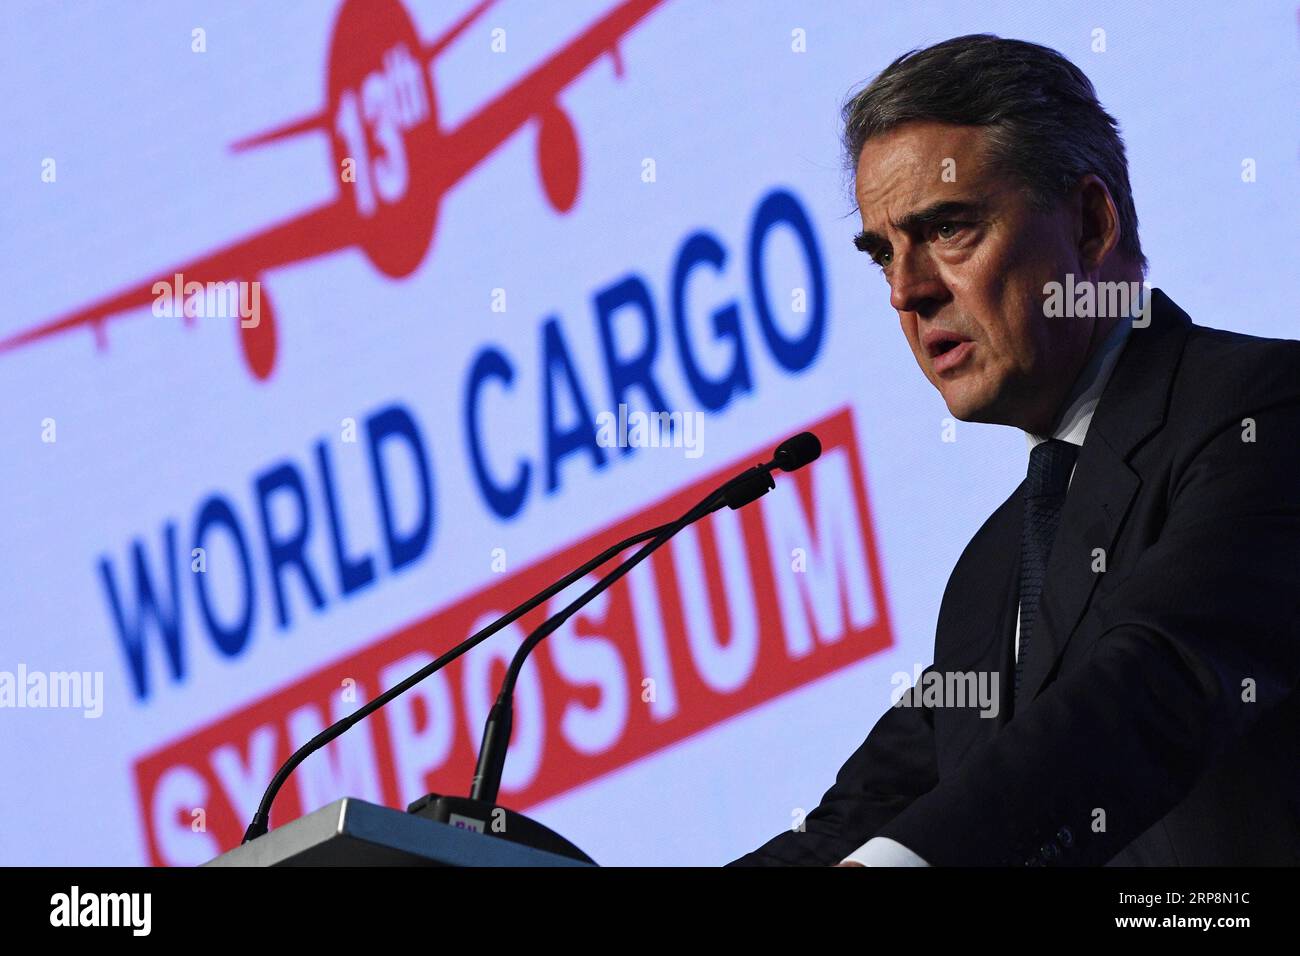 190312) -- SINGAPORE, March 12, 2019 -- International Air Transport  Association (IATA) Director General and Chief Executive Officer Alexandre  de Juniac speaks at the opening ceremony of the IATA 13th World Cargo